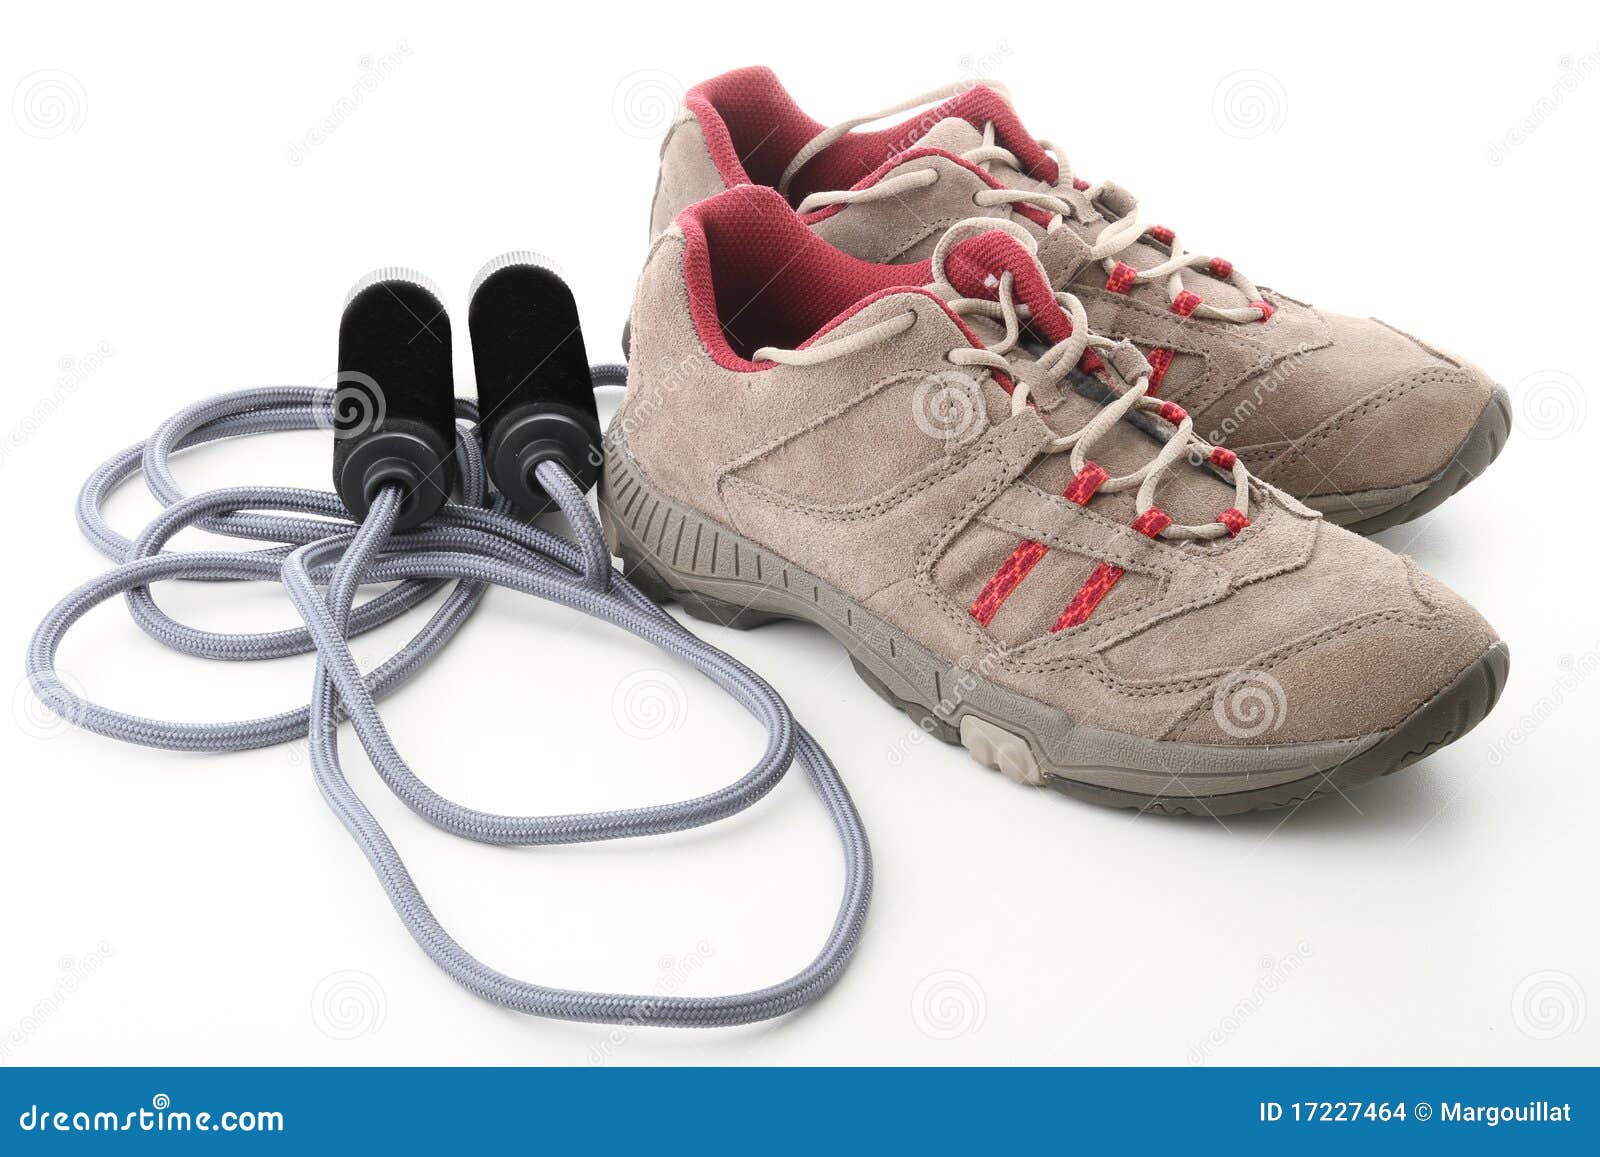 Shoes and jump rope stock photo. Image of exercise, jogging - 17227464